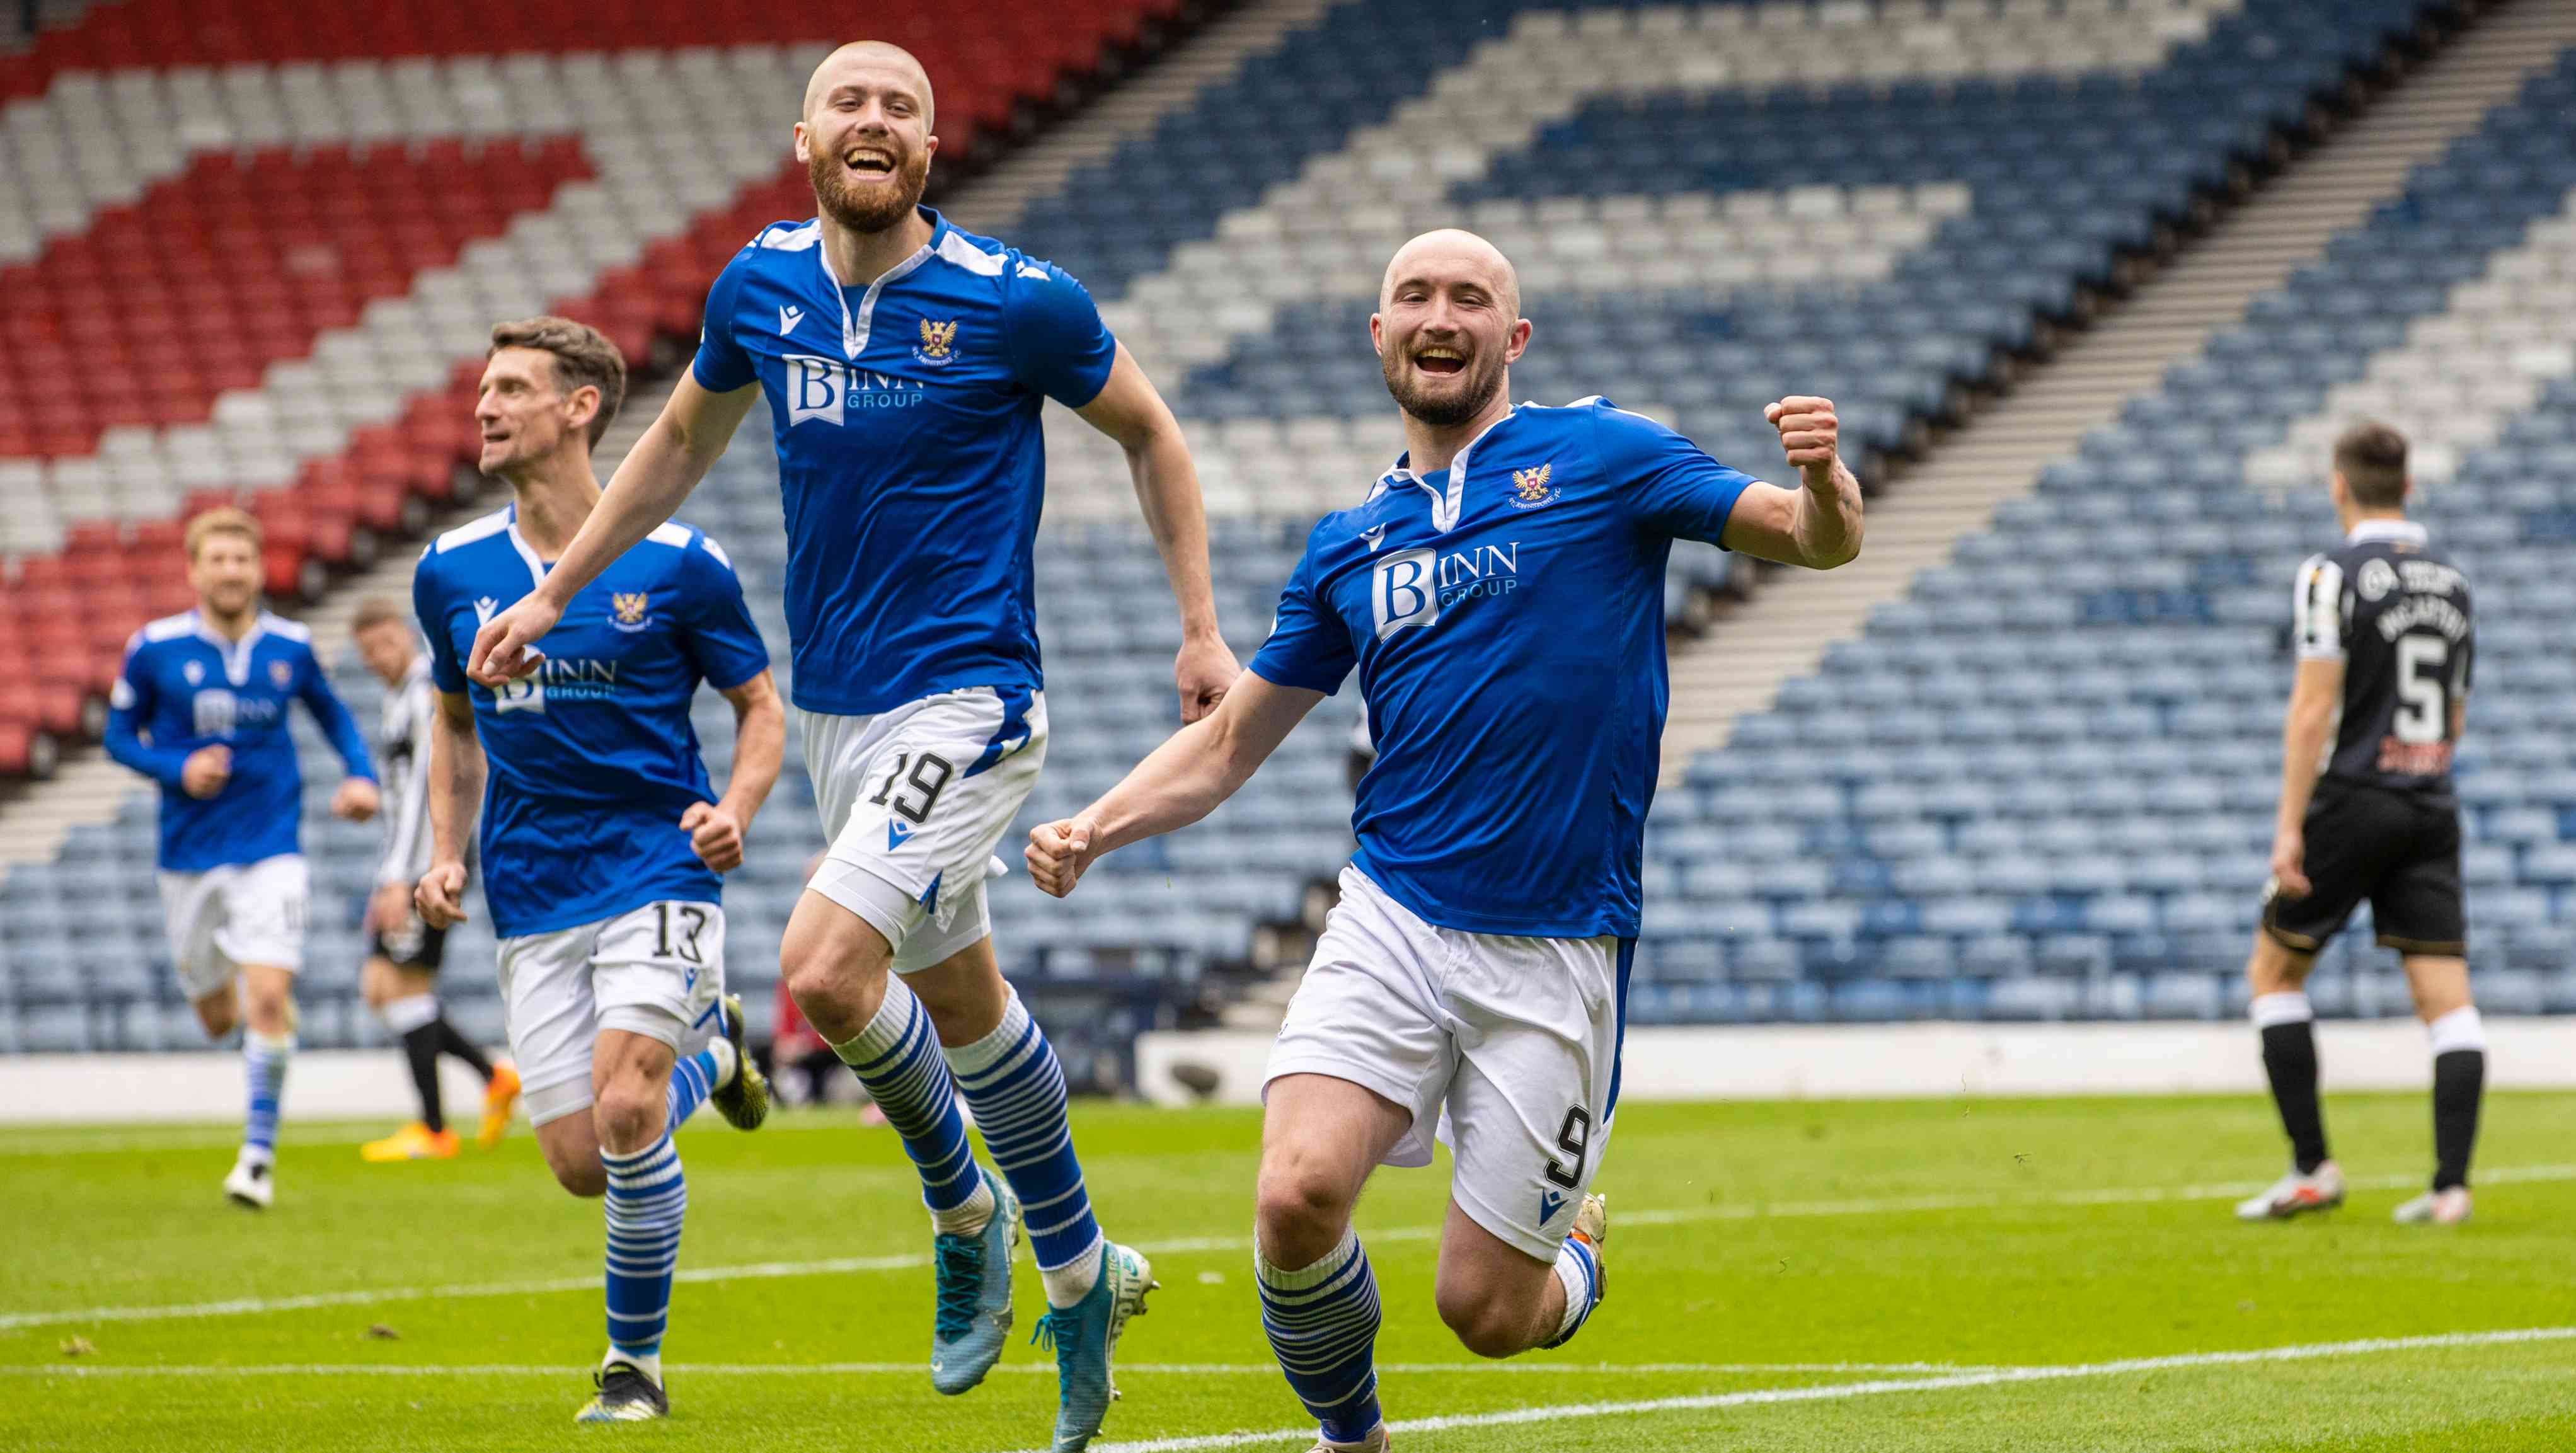 Chris Kane puts St Johnstone 1-0 up in the semi-final.